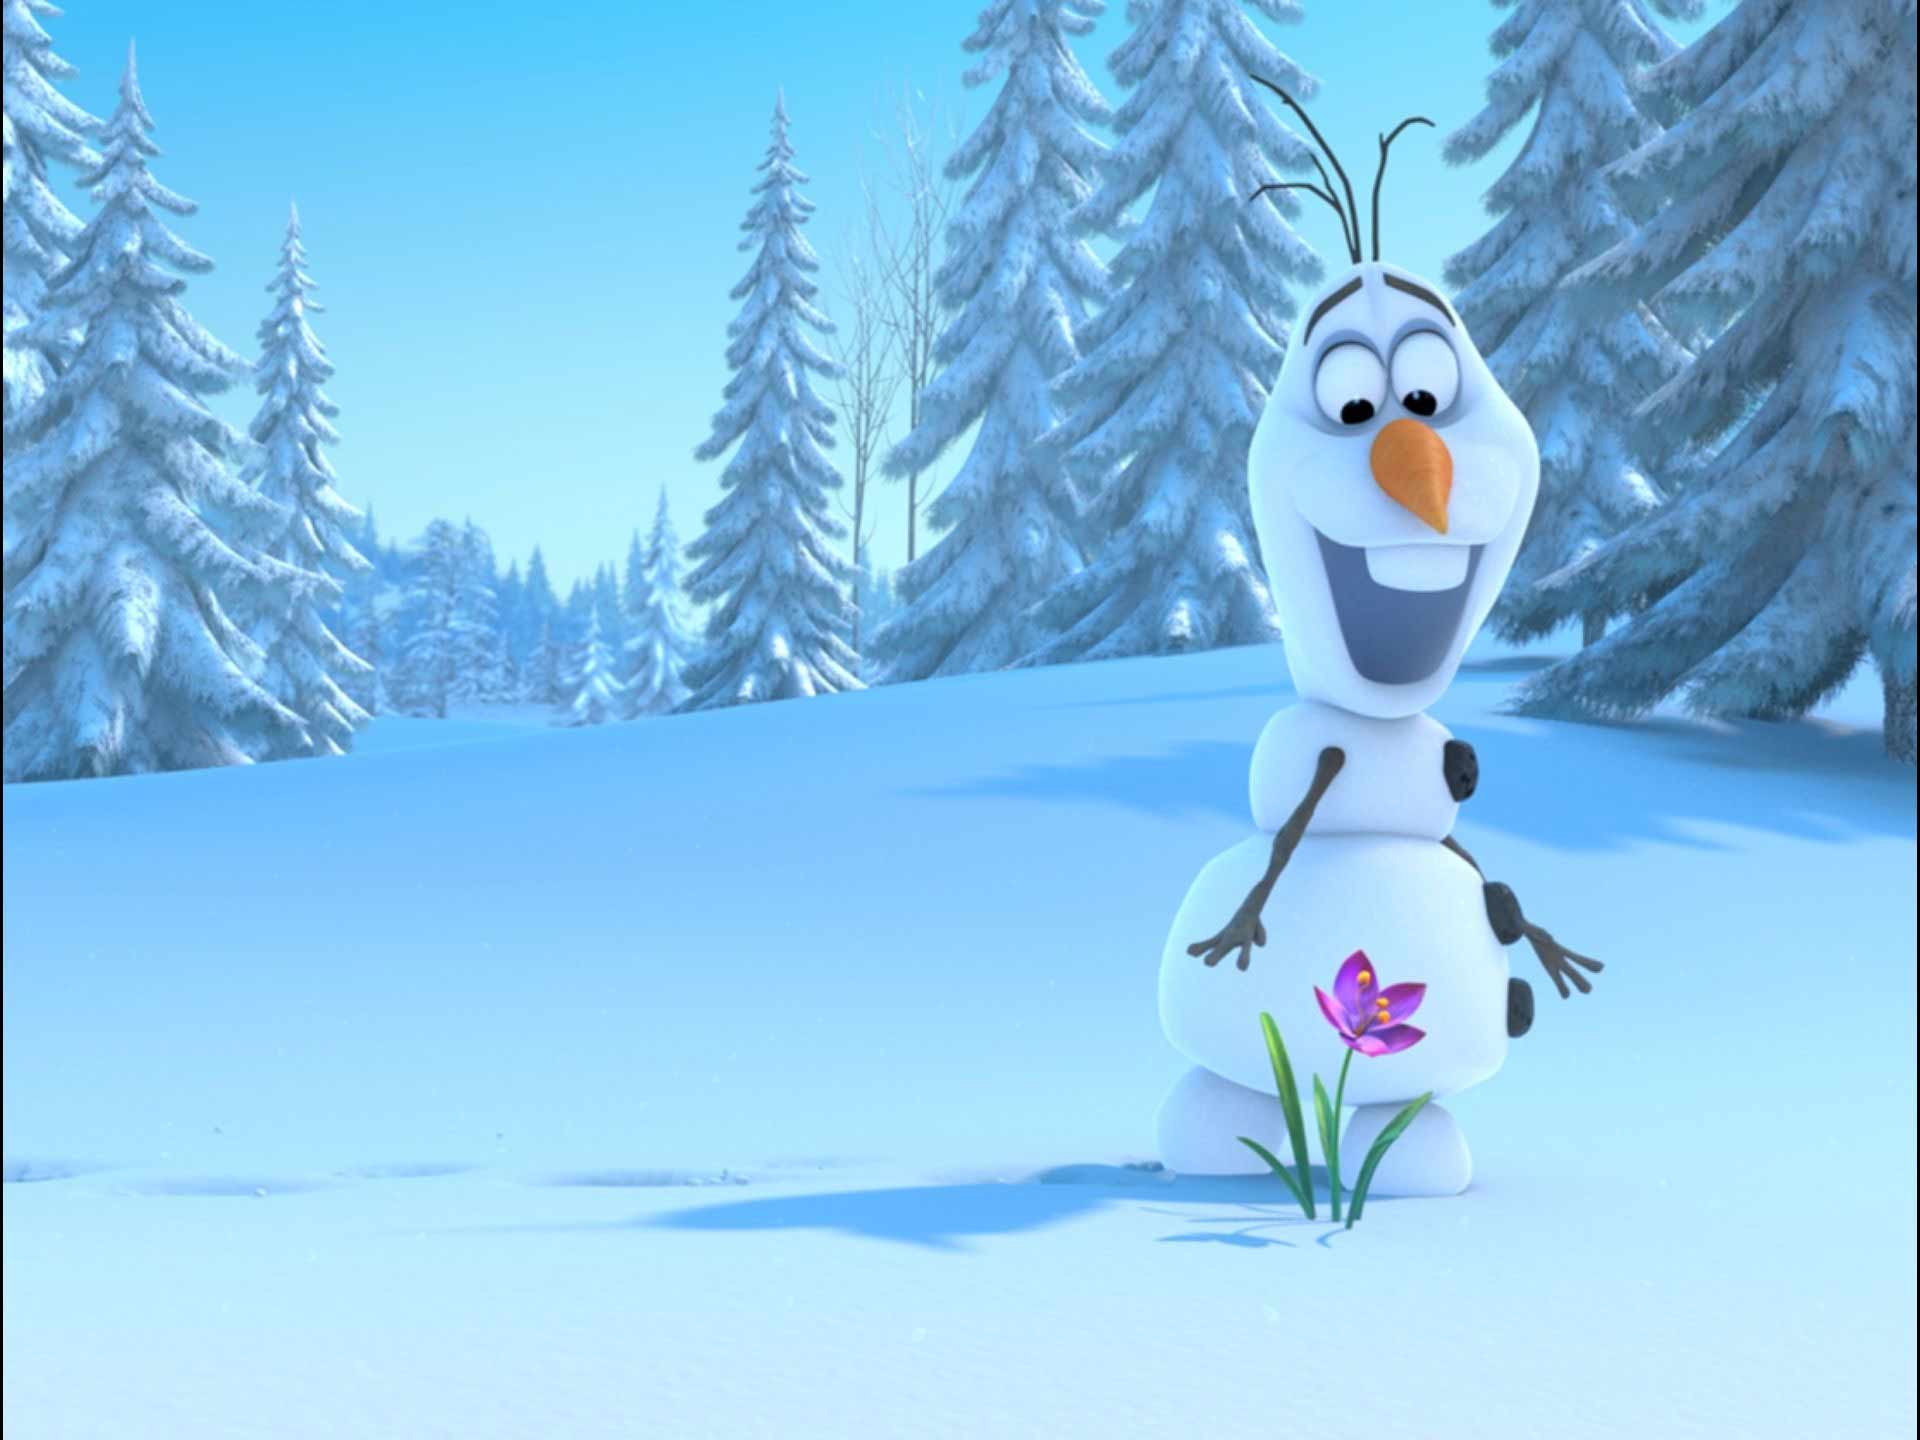  backgrounds anna frozen movie wallpapers free disney movie wallpapers